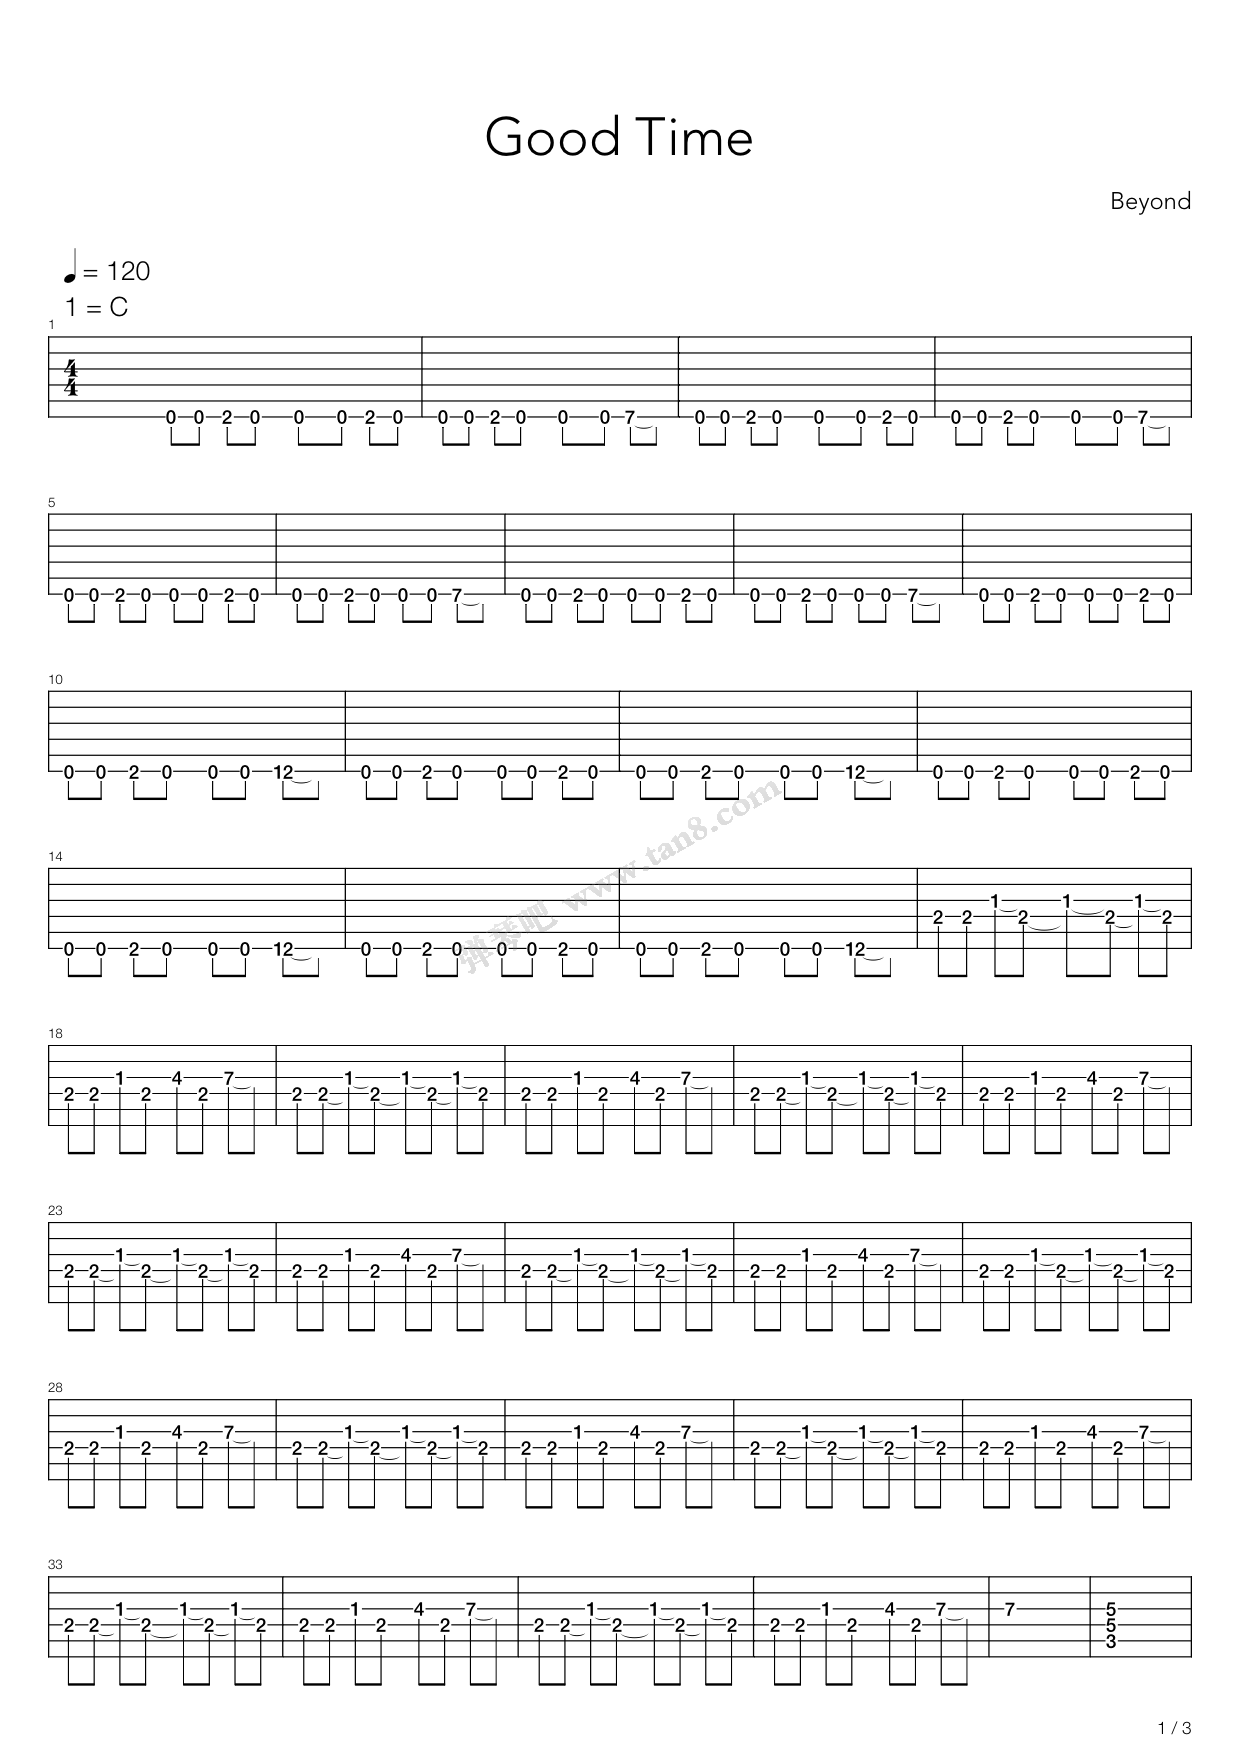 Hans Zimmer "Earth" Sheet Music Notes | Download Printable PDF Score 175949